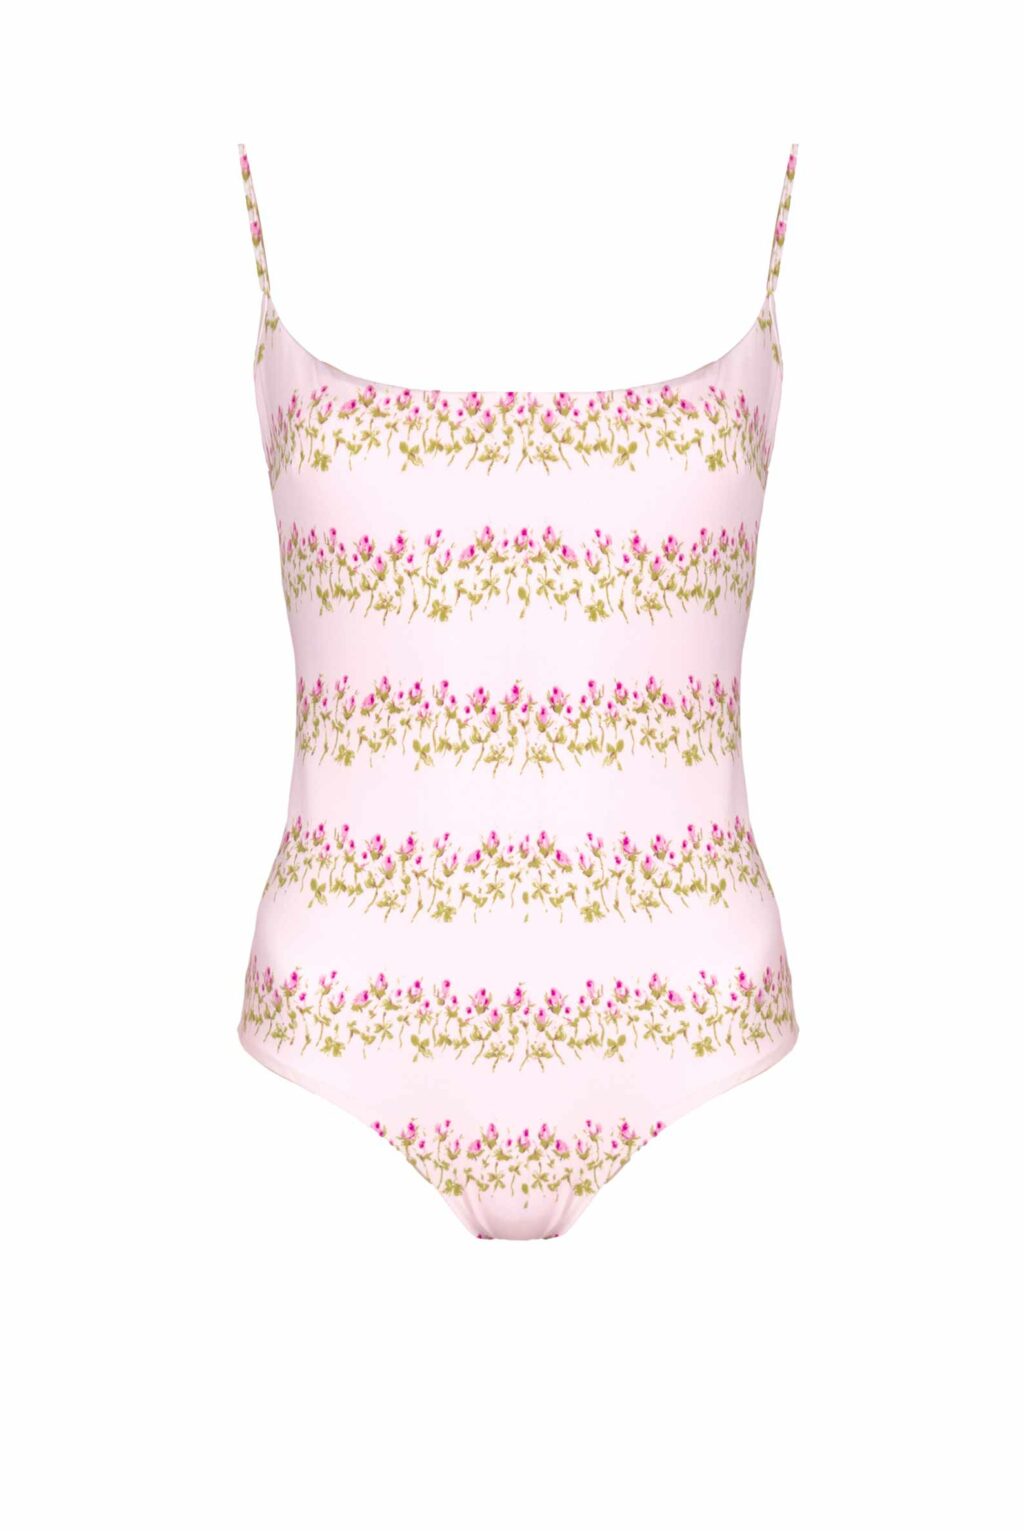 One-piece Pink Flowery striped Swimsuit - Luisa Beccaria